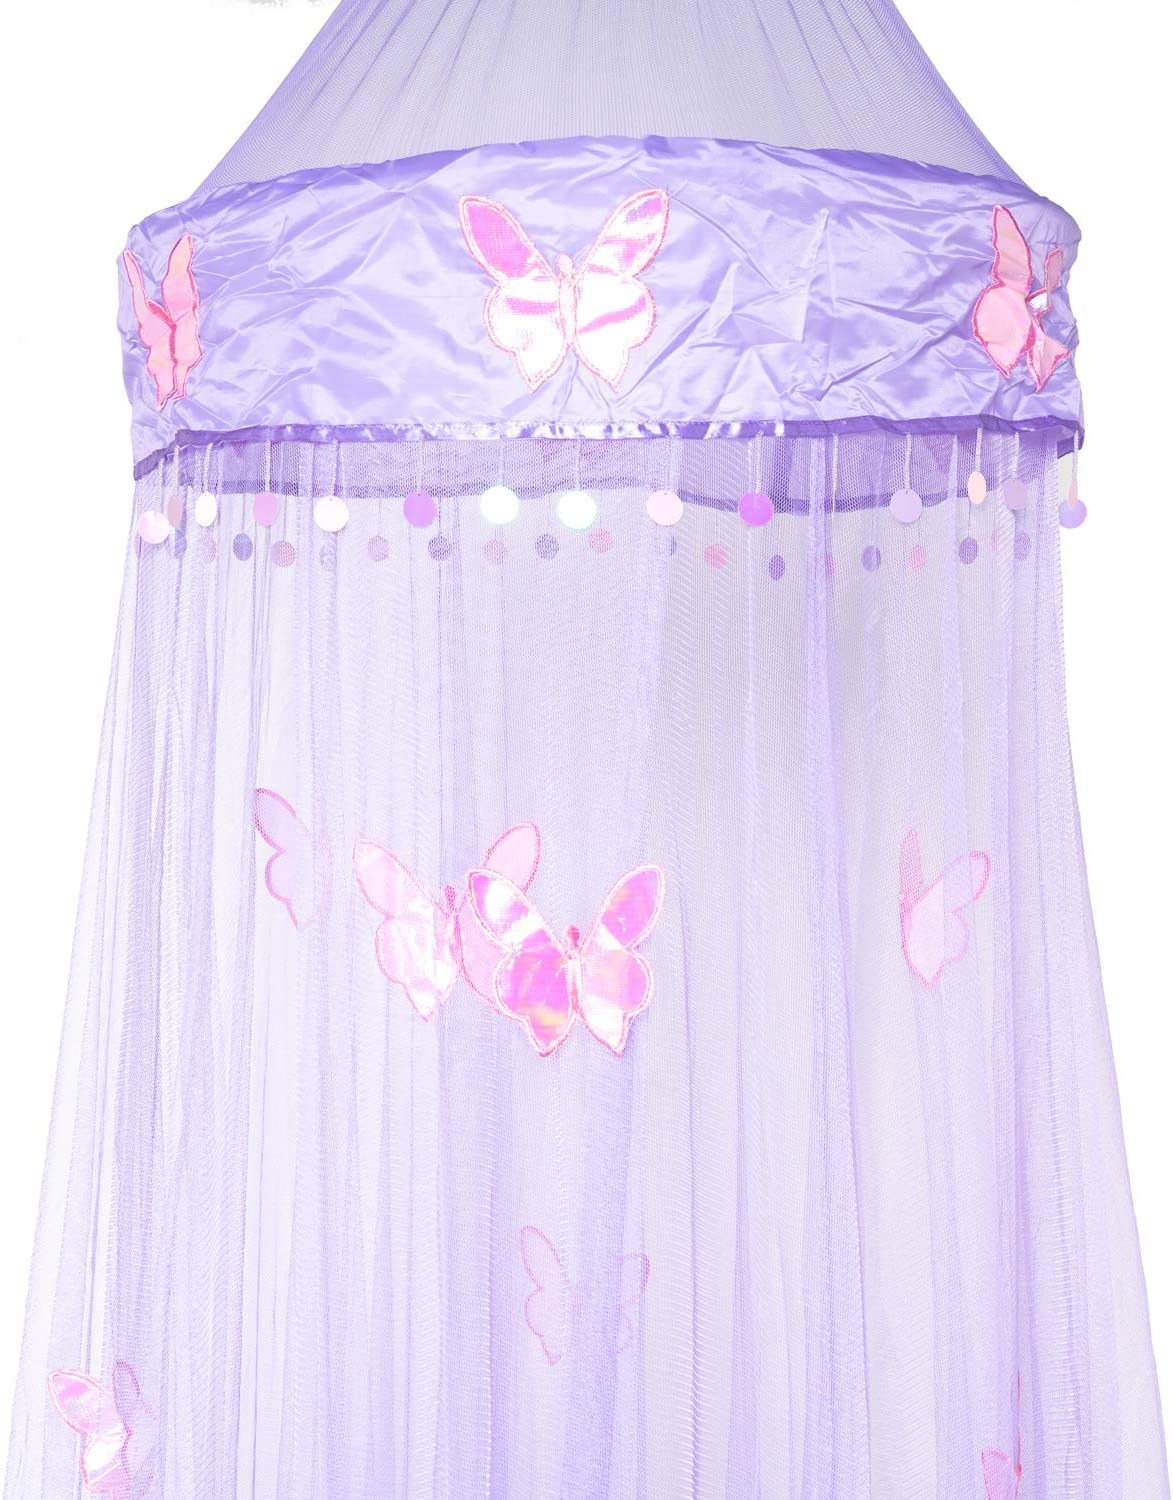 construir Asombro provocar OctoRose Butterfly Bed Canopy Mosquito NET Crib Twin Full Queen King  (Purple) | eBay